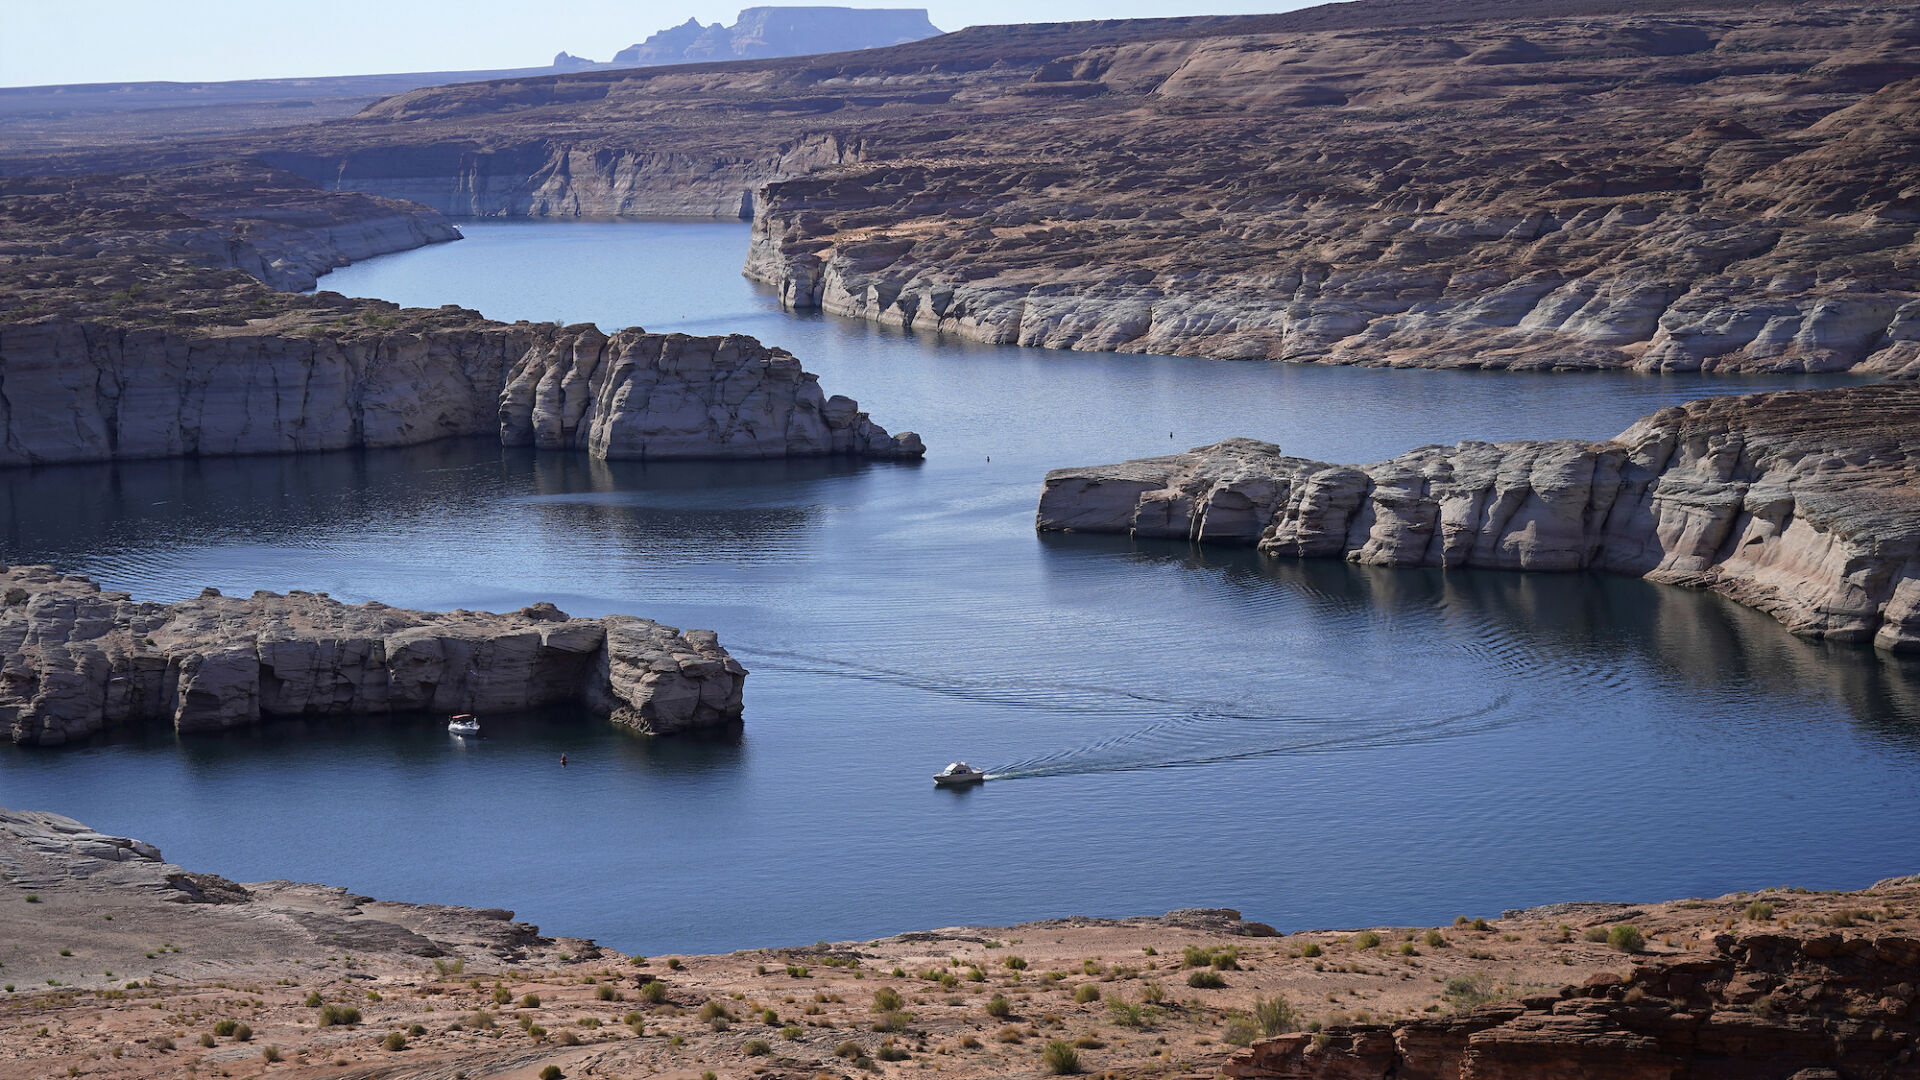 Lake Powell, Colorado river deals, Hydropower protection, Water conservation, 1920x1080 Full HD Desktop